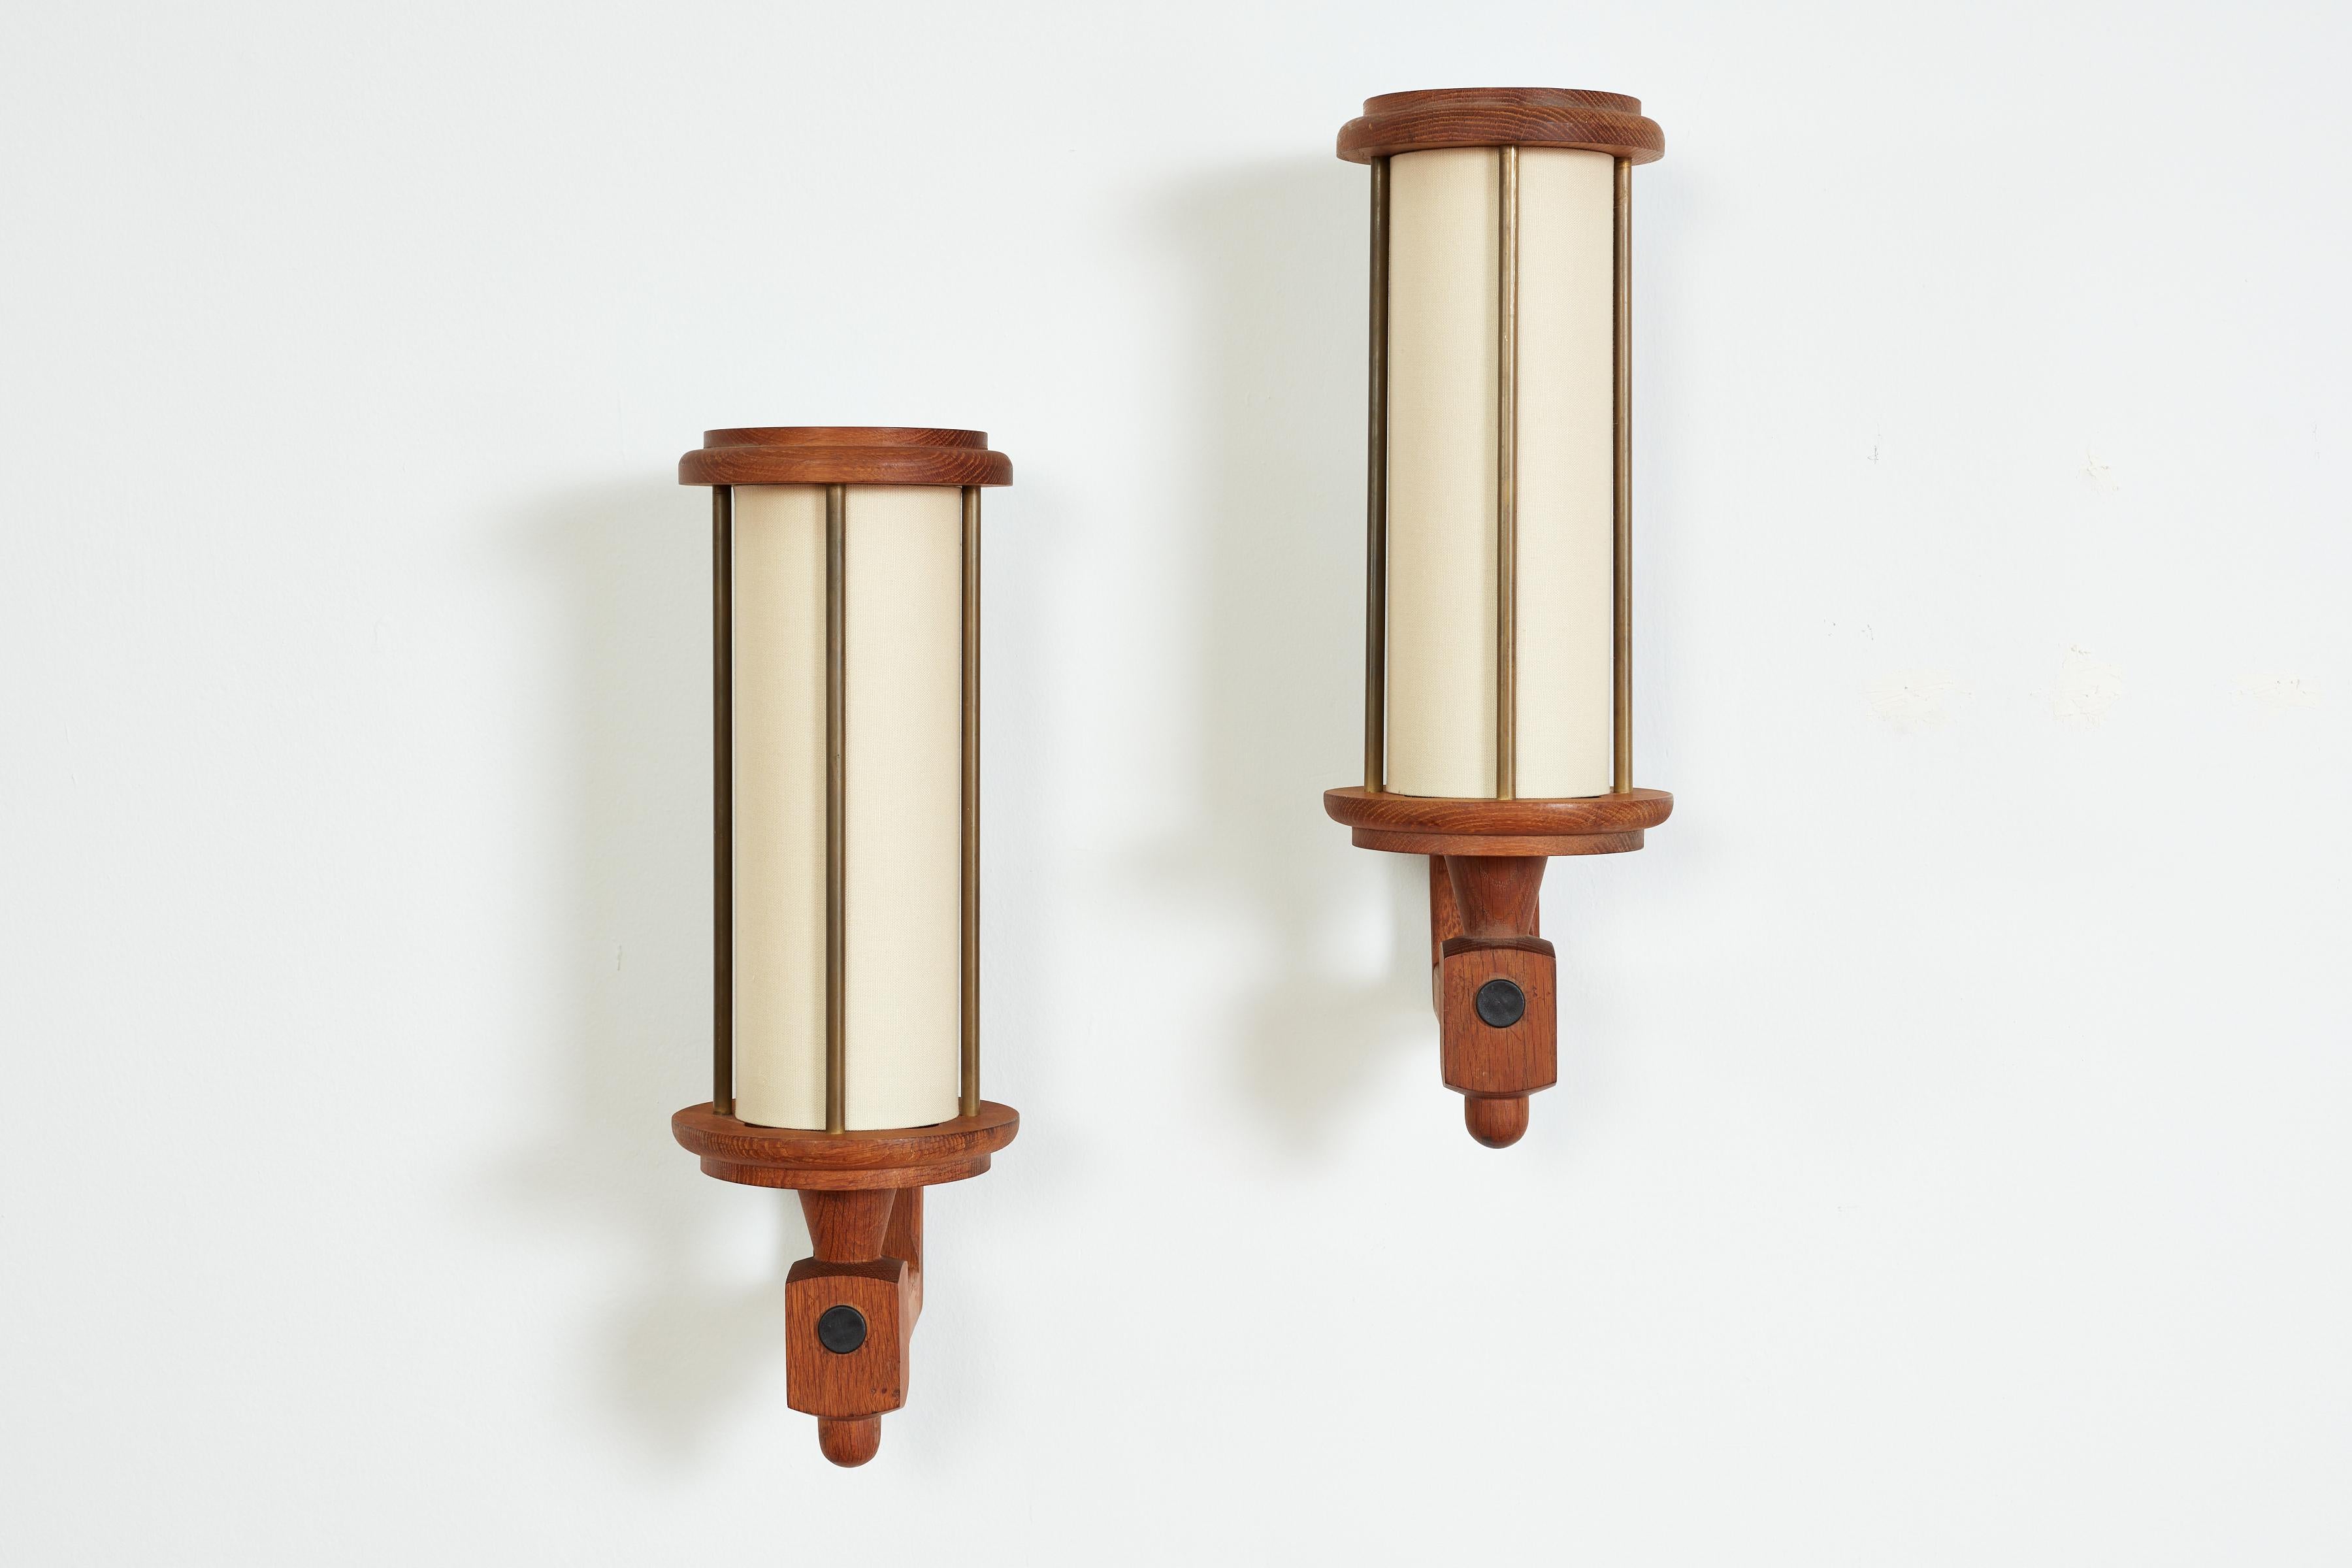 Rare pair of large scale sconces by Guillerme et Chambron - France, 1960s
Oak with brass linear hardware - tubular new linen shade 
Great patina on brass
Newly rewired.